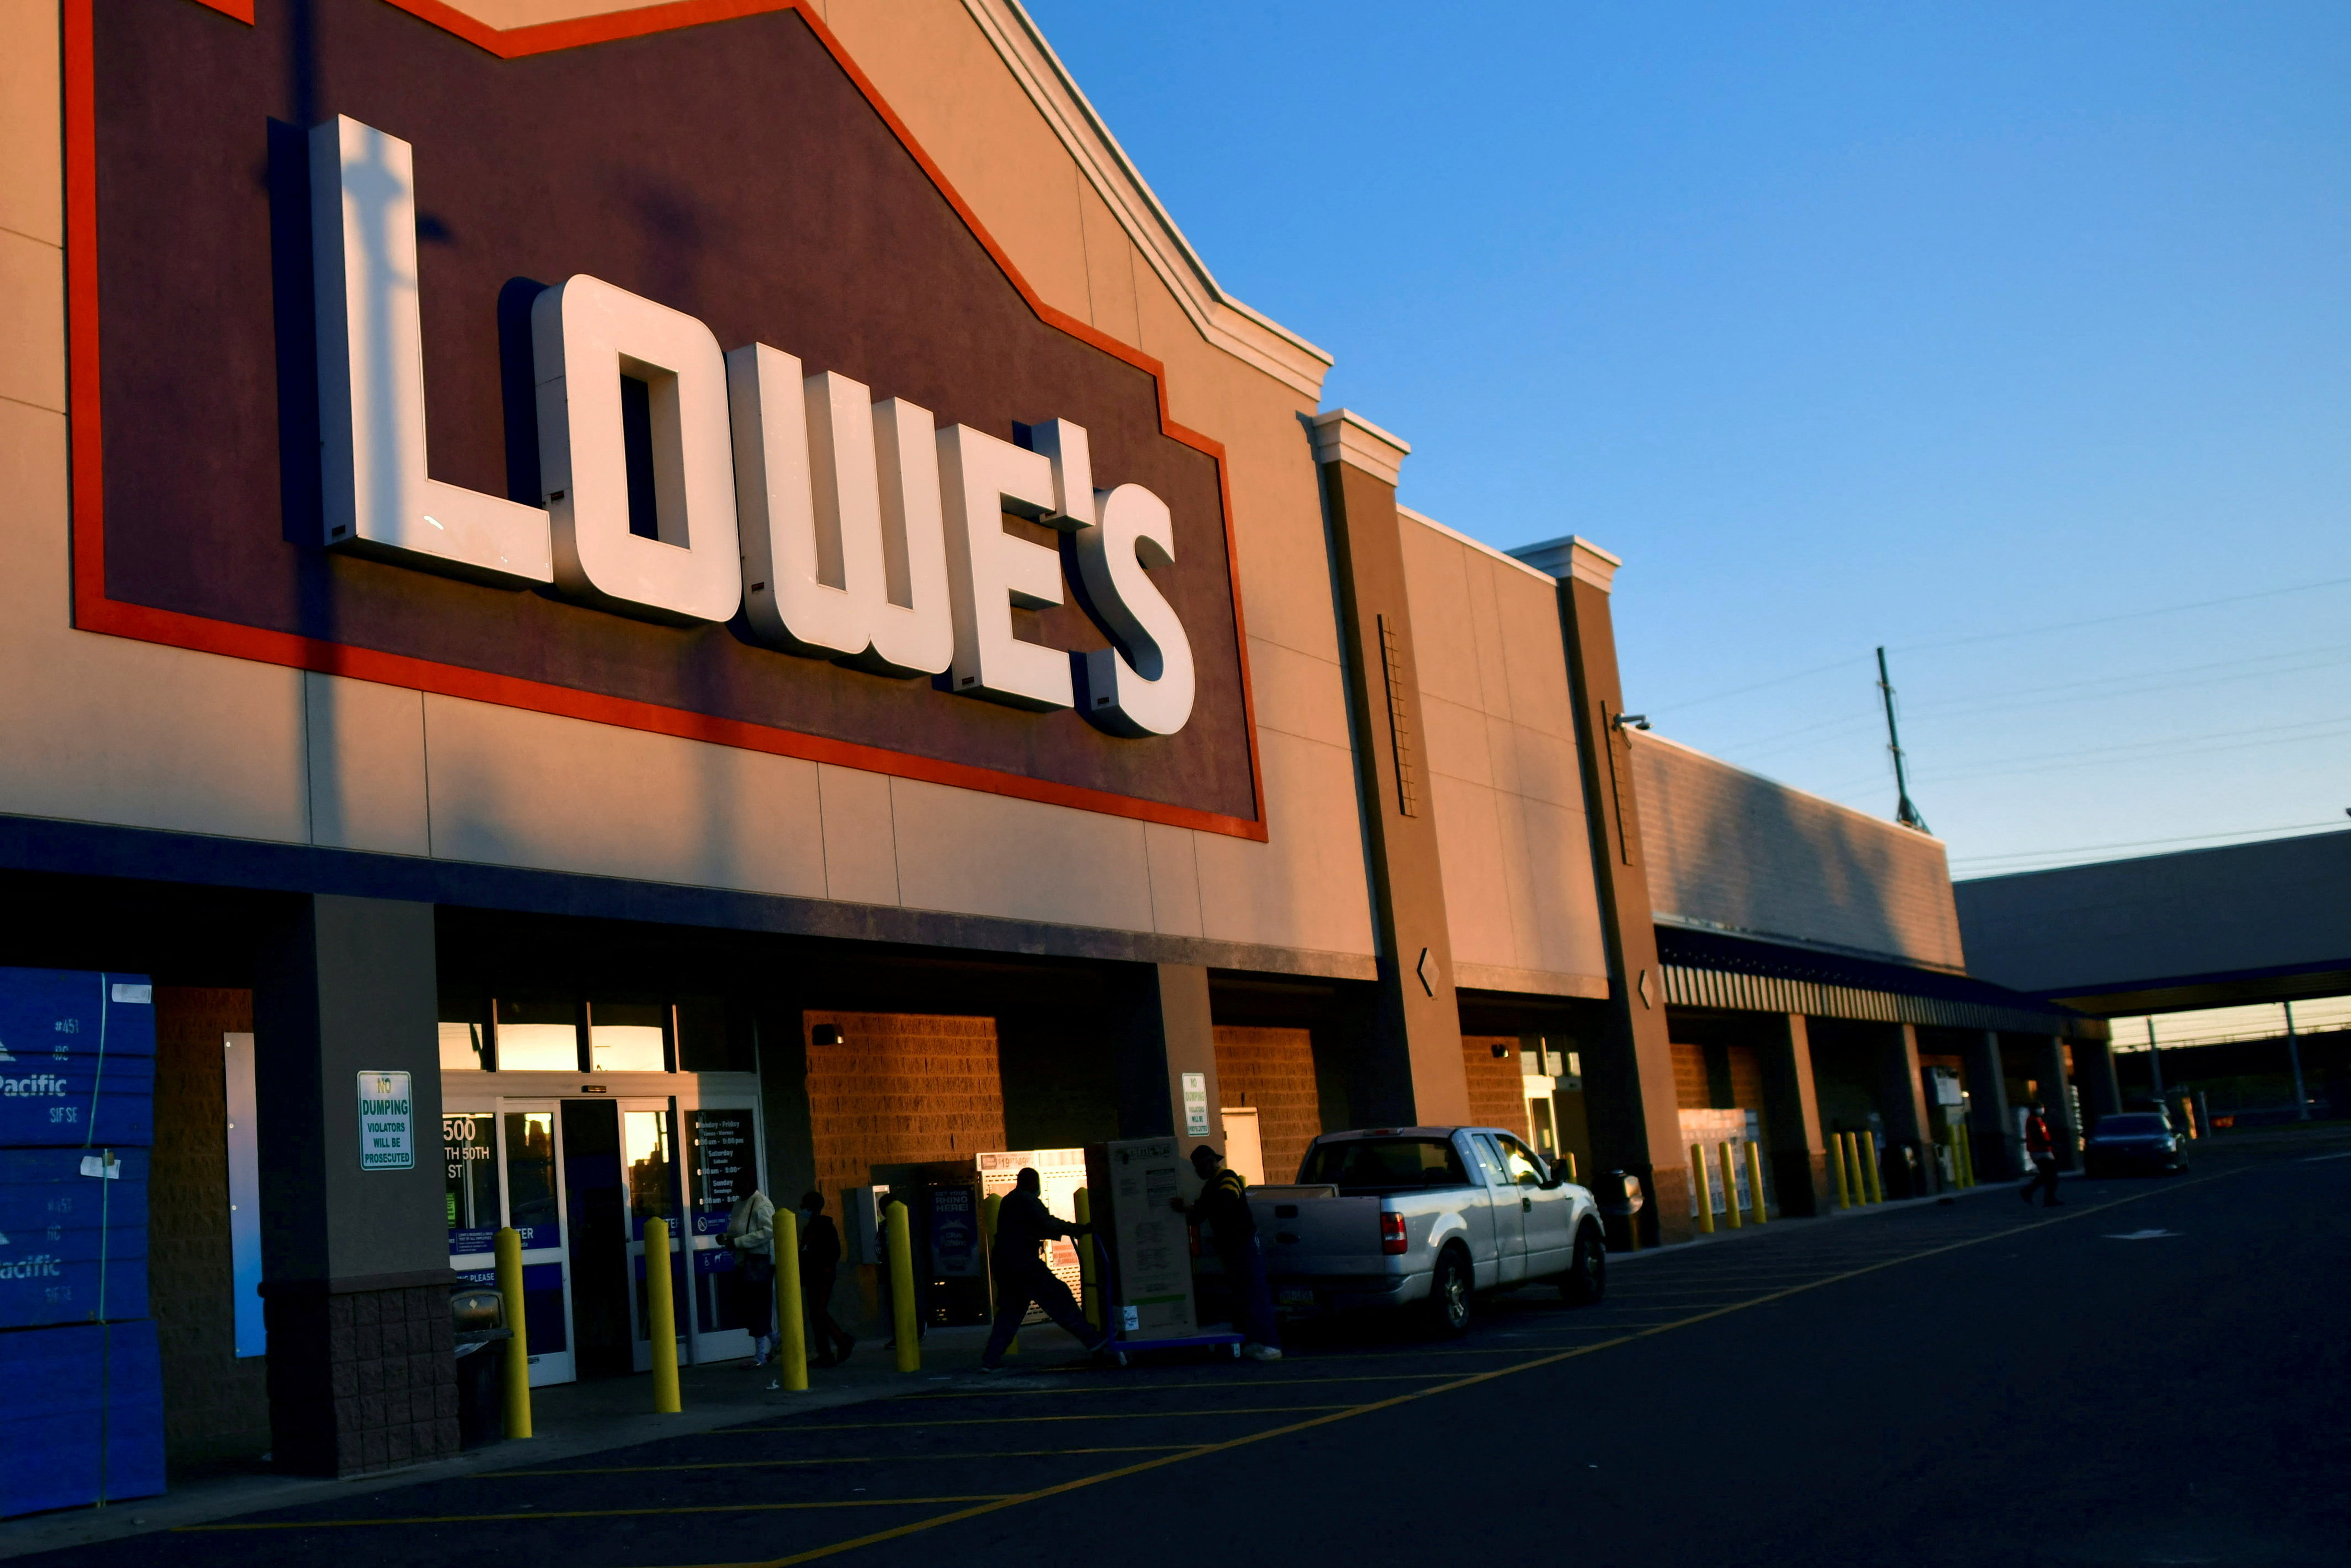 Shoppers departs after visiting a Lowe's hardware store in Philadelphia